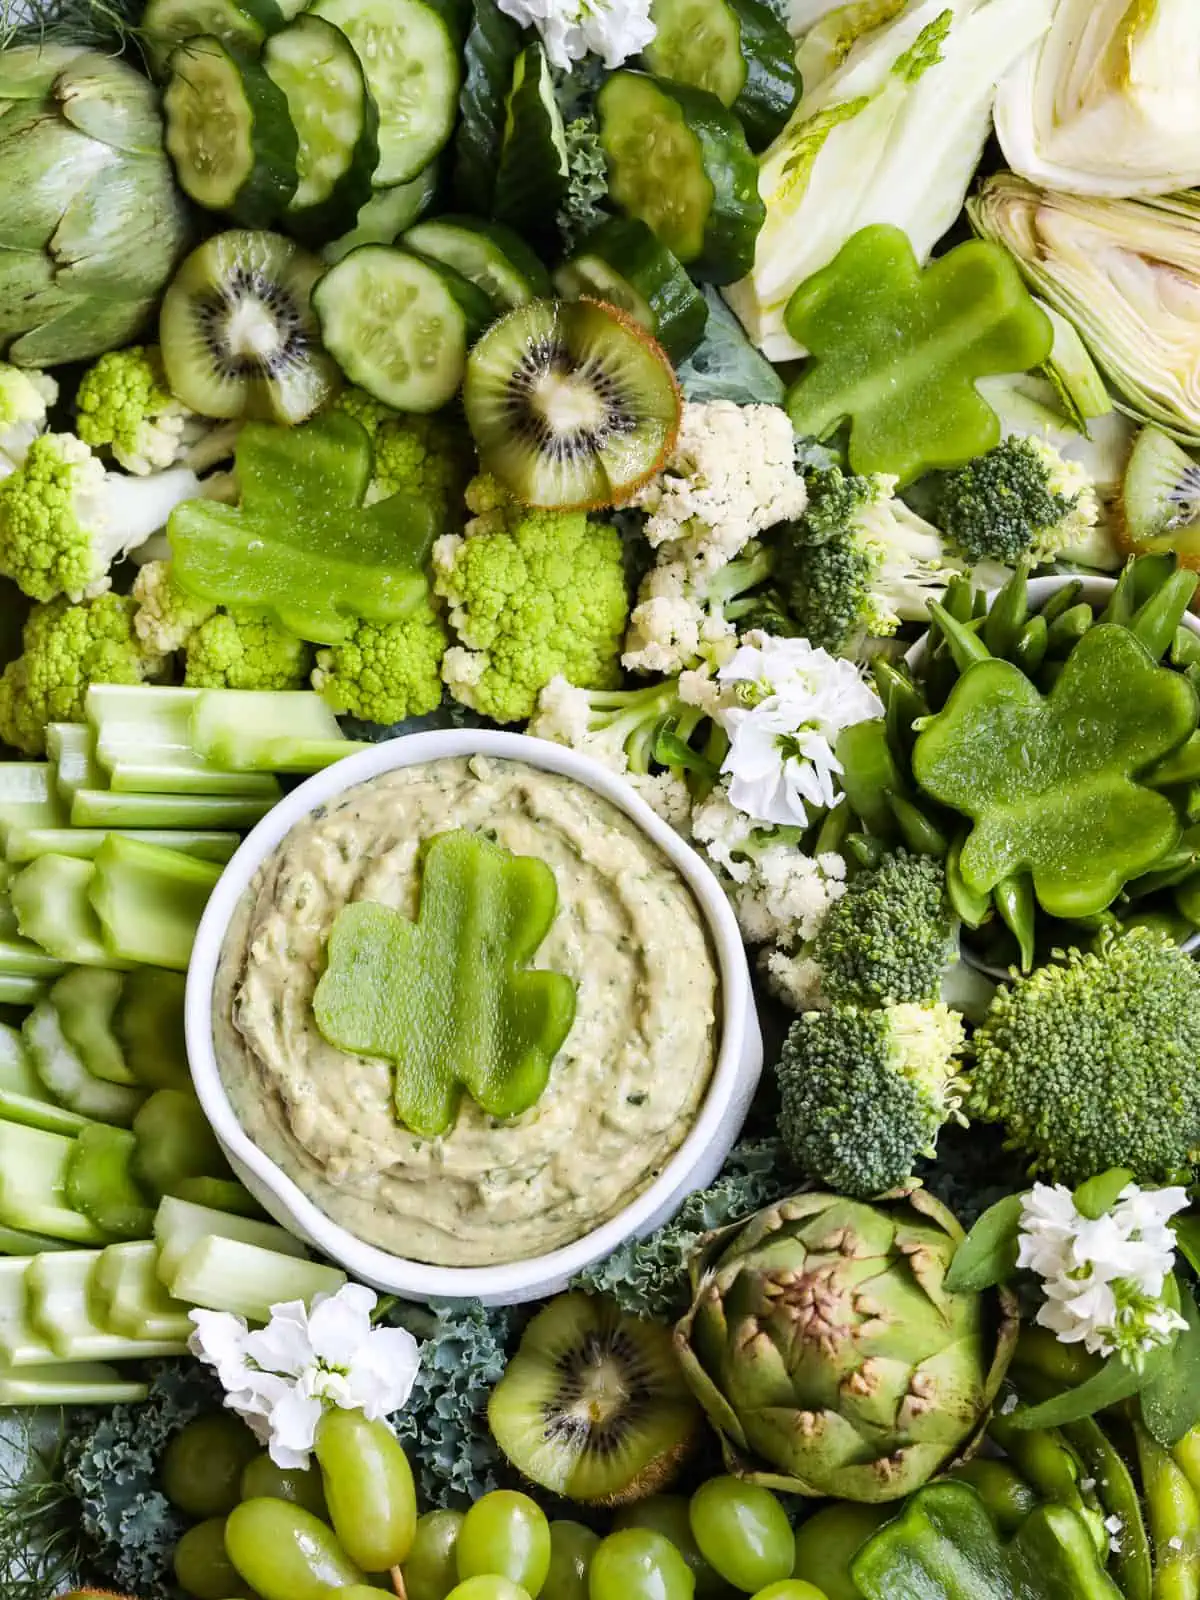 An all green vegetable tray for St. Patrick's Day with cut veggies and fruit with a dip.